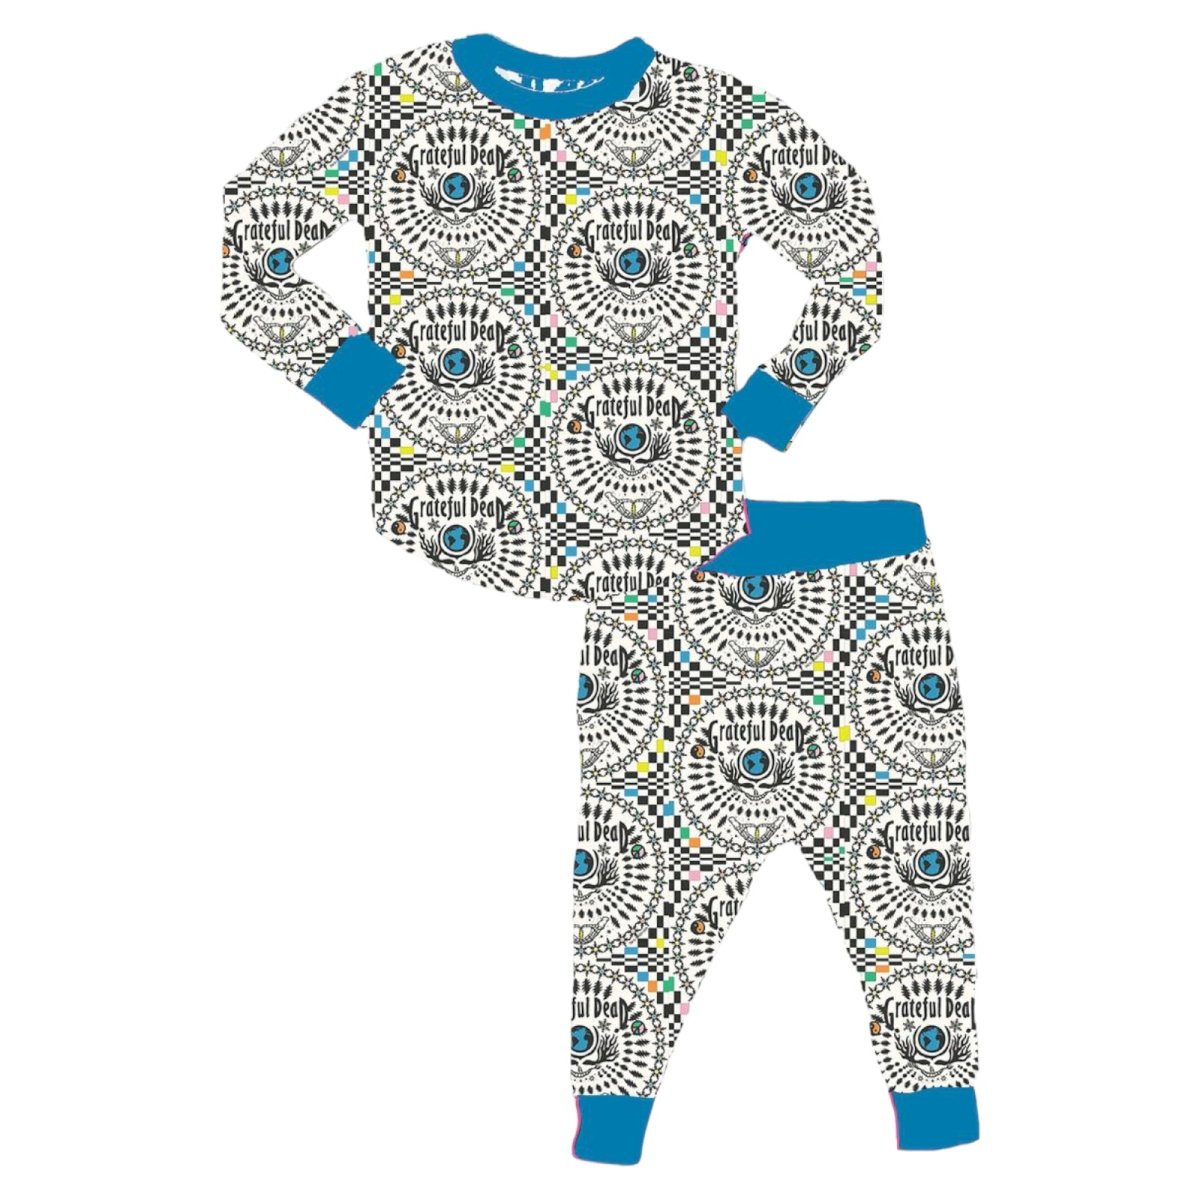 GRATEFUL DEAD LONG SLEEVE BAMBOO PJS - ROWDY SPROUT